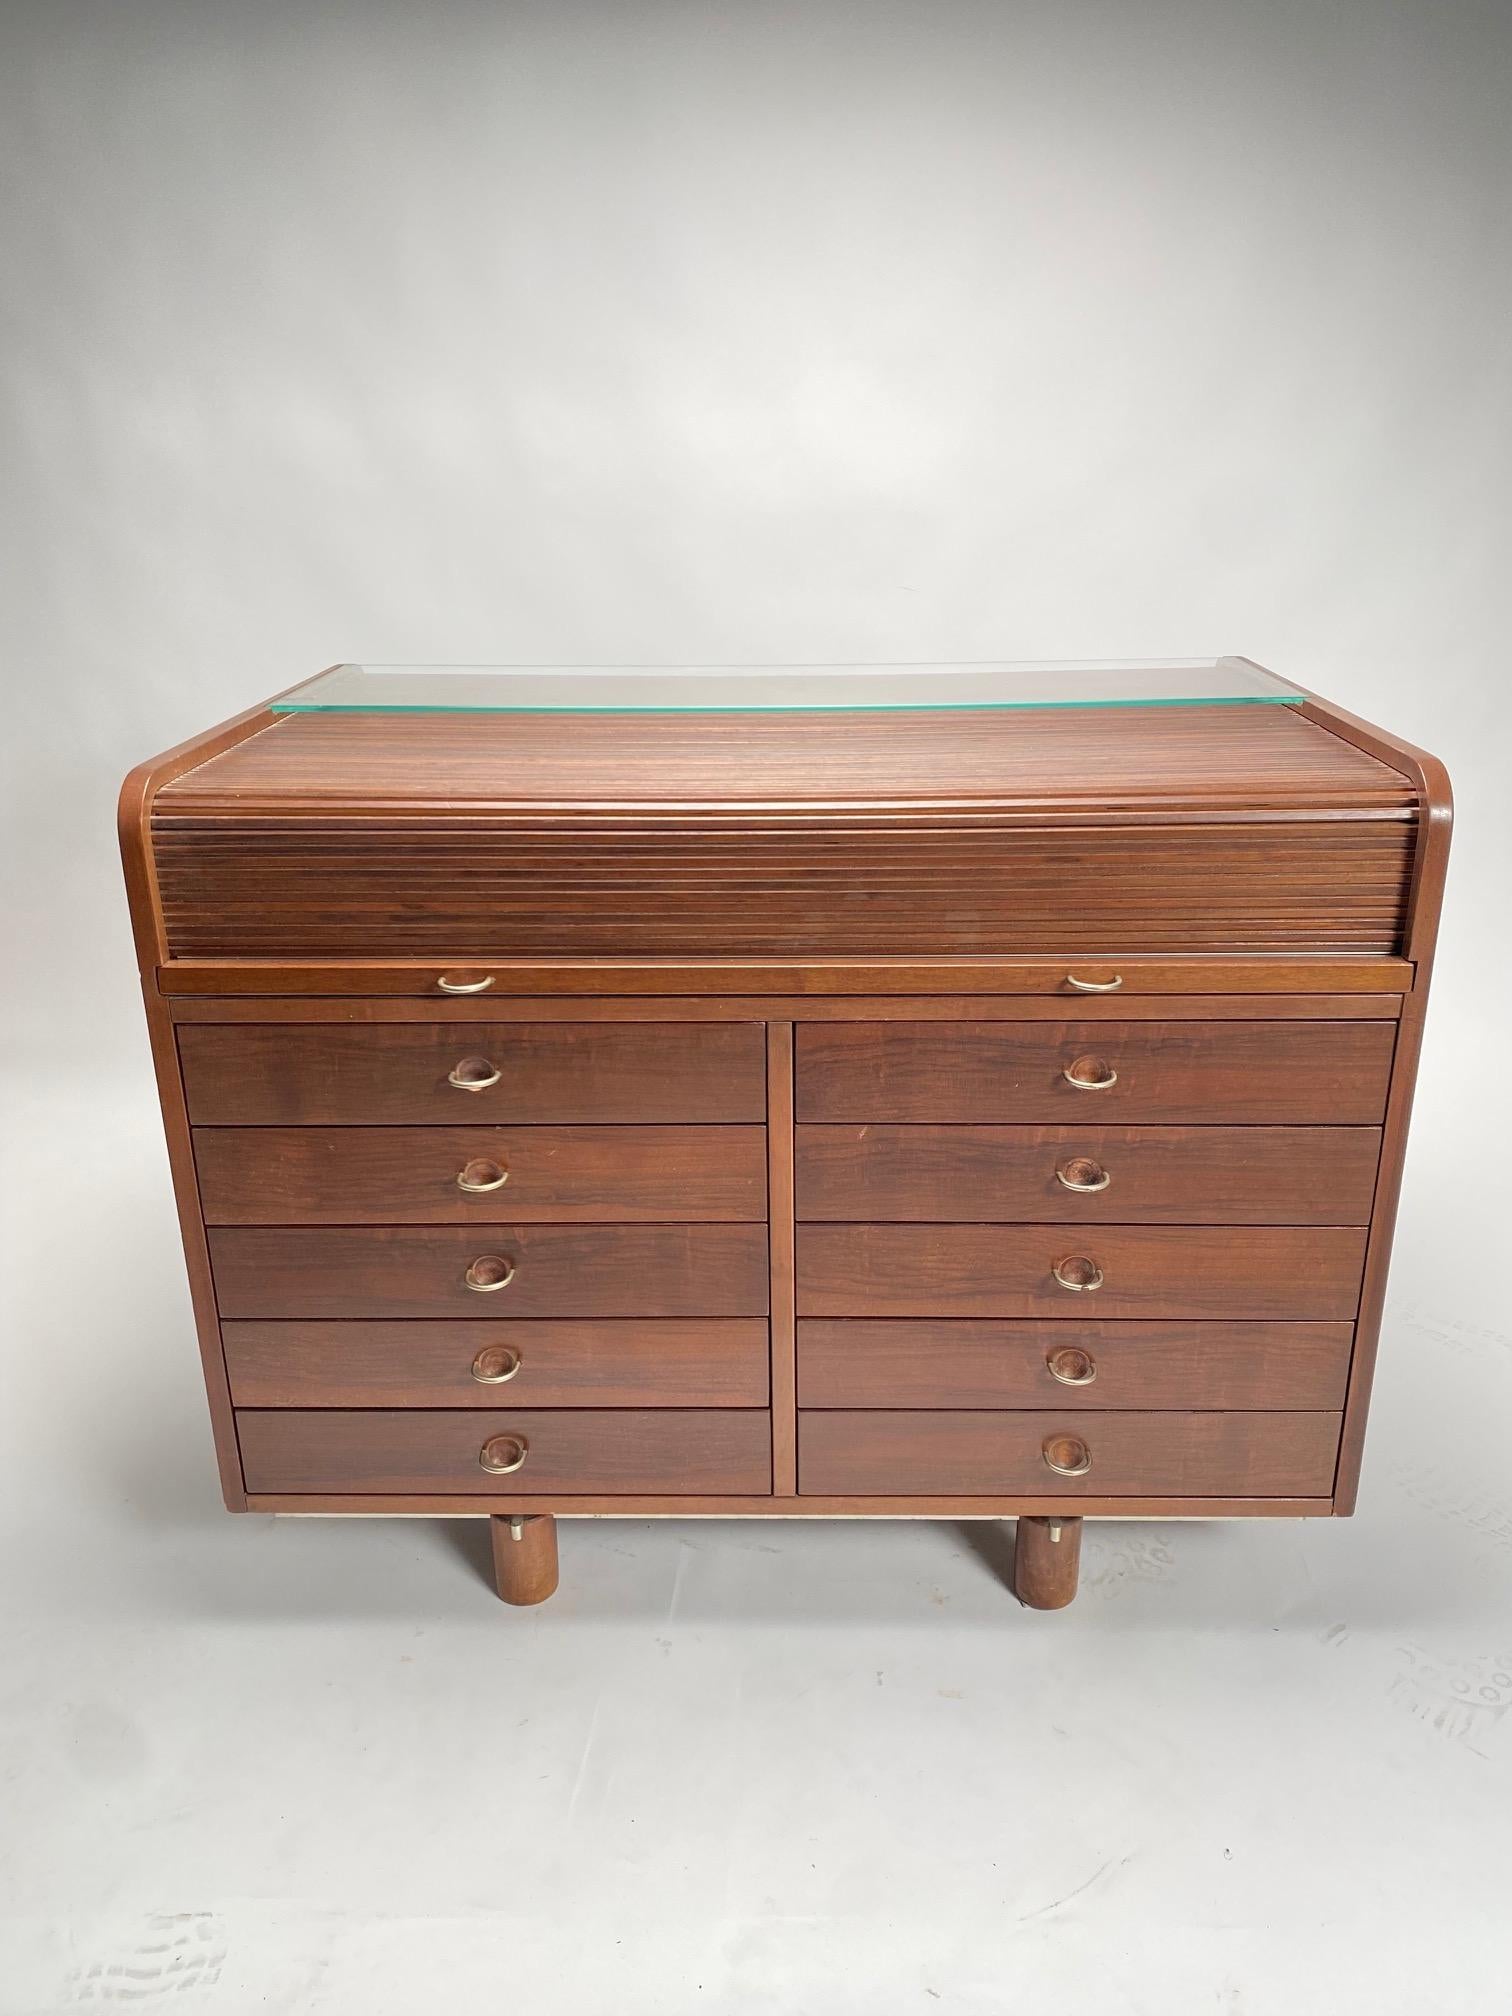 Gianfranco Frattini designed this gorgeous rosewood rolltop desk, model 804, for Bernini in the early 1960s. What appears to be a compact chest of ten drawers with chrome pulls transforms into a desk when the concealed leather-covered top is pulled